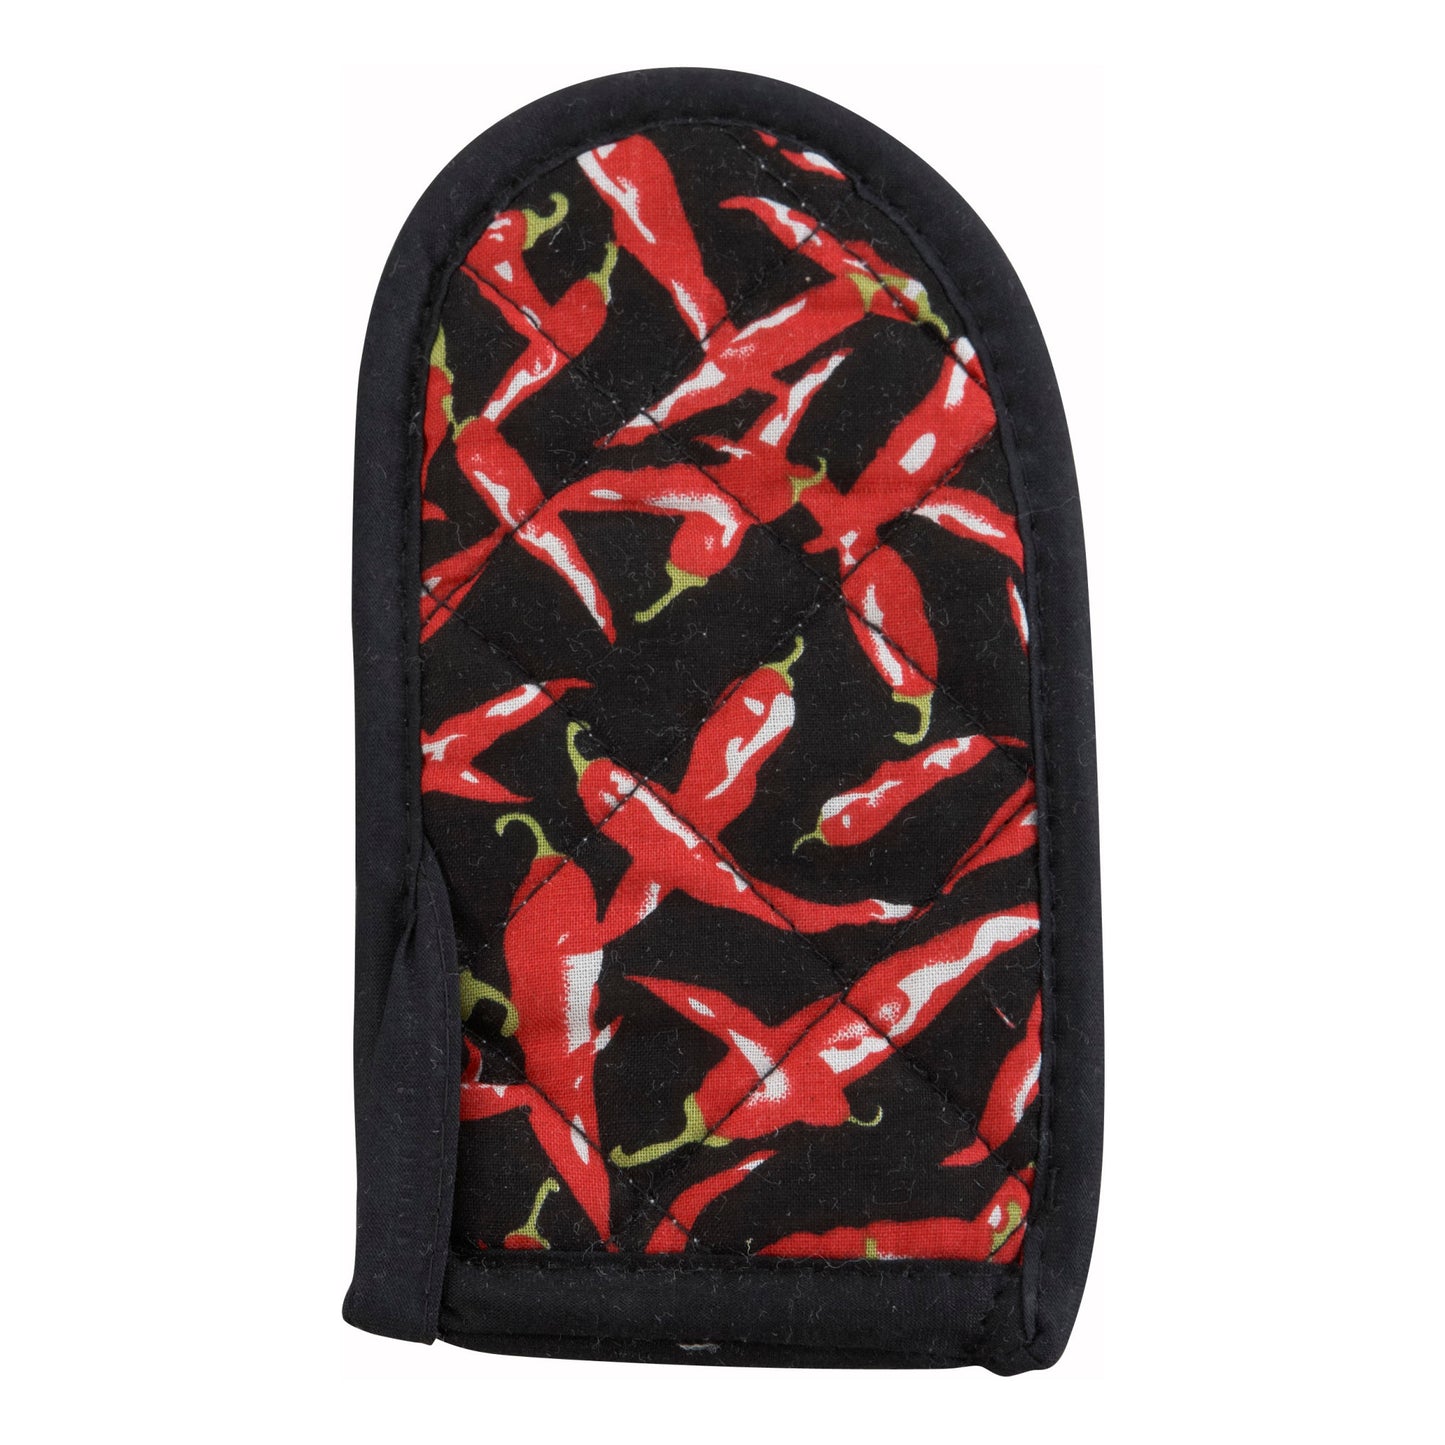 HDH-6C - Cotton Handle Holder, Chili Peppers